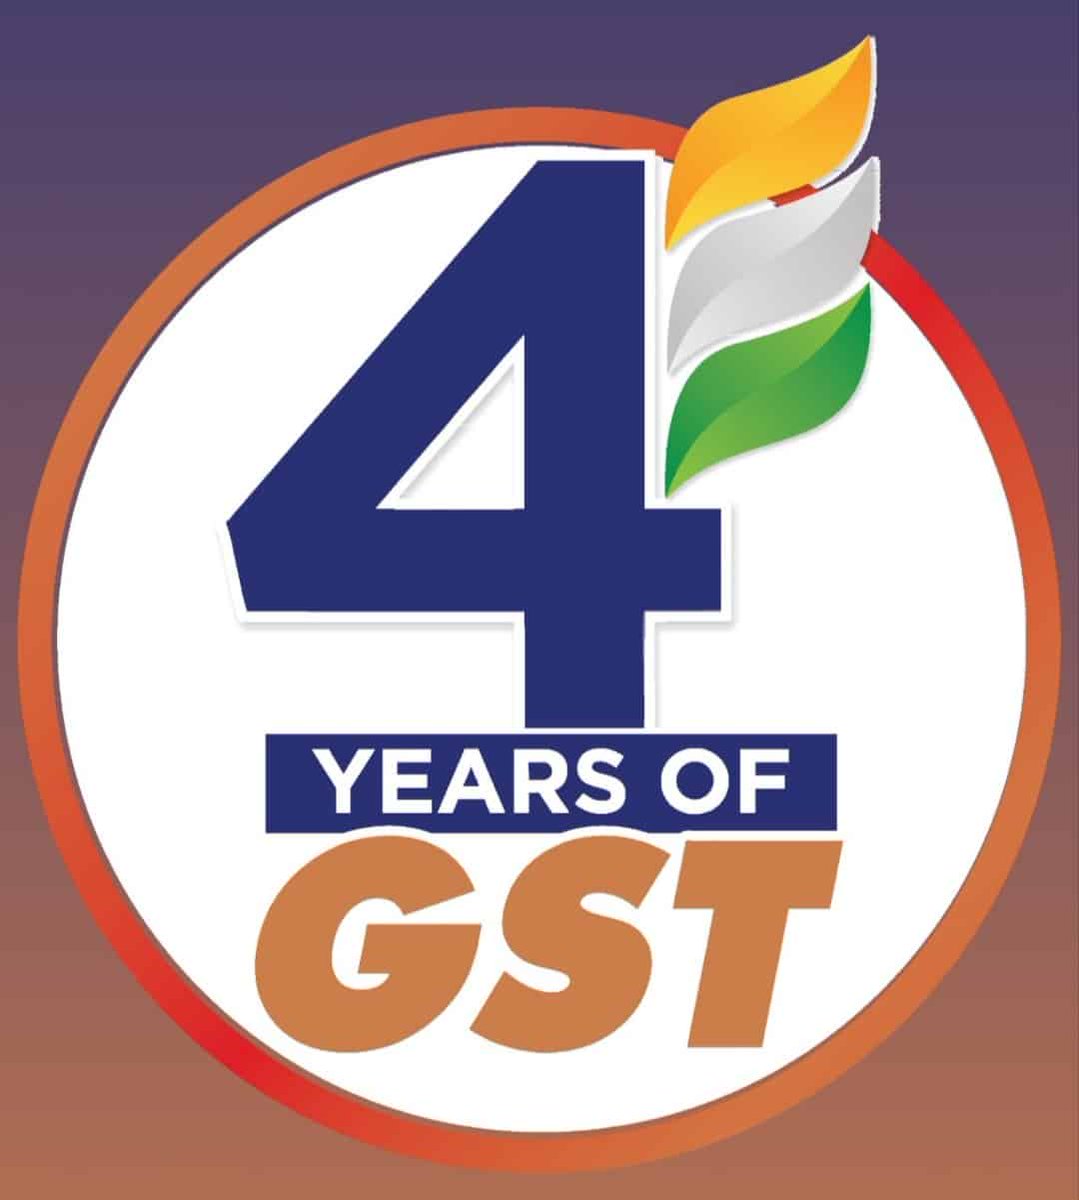 Mumbai South Commissionerate organized a webinar on 'Dispute Resolution in GST' On  06.07.2021 Tuesday,From 03:00 PM to 04:00 PM.
#4YearsofGST
@cbic_india
@FinMinIndia 
@cgstmumbaizone